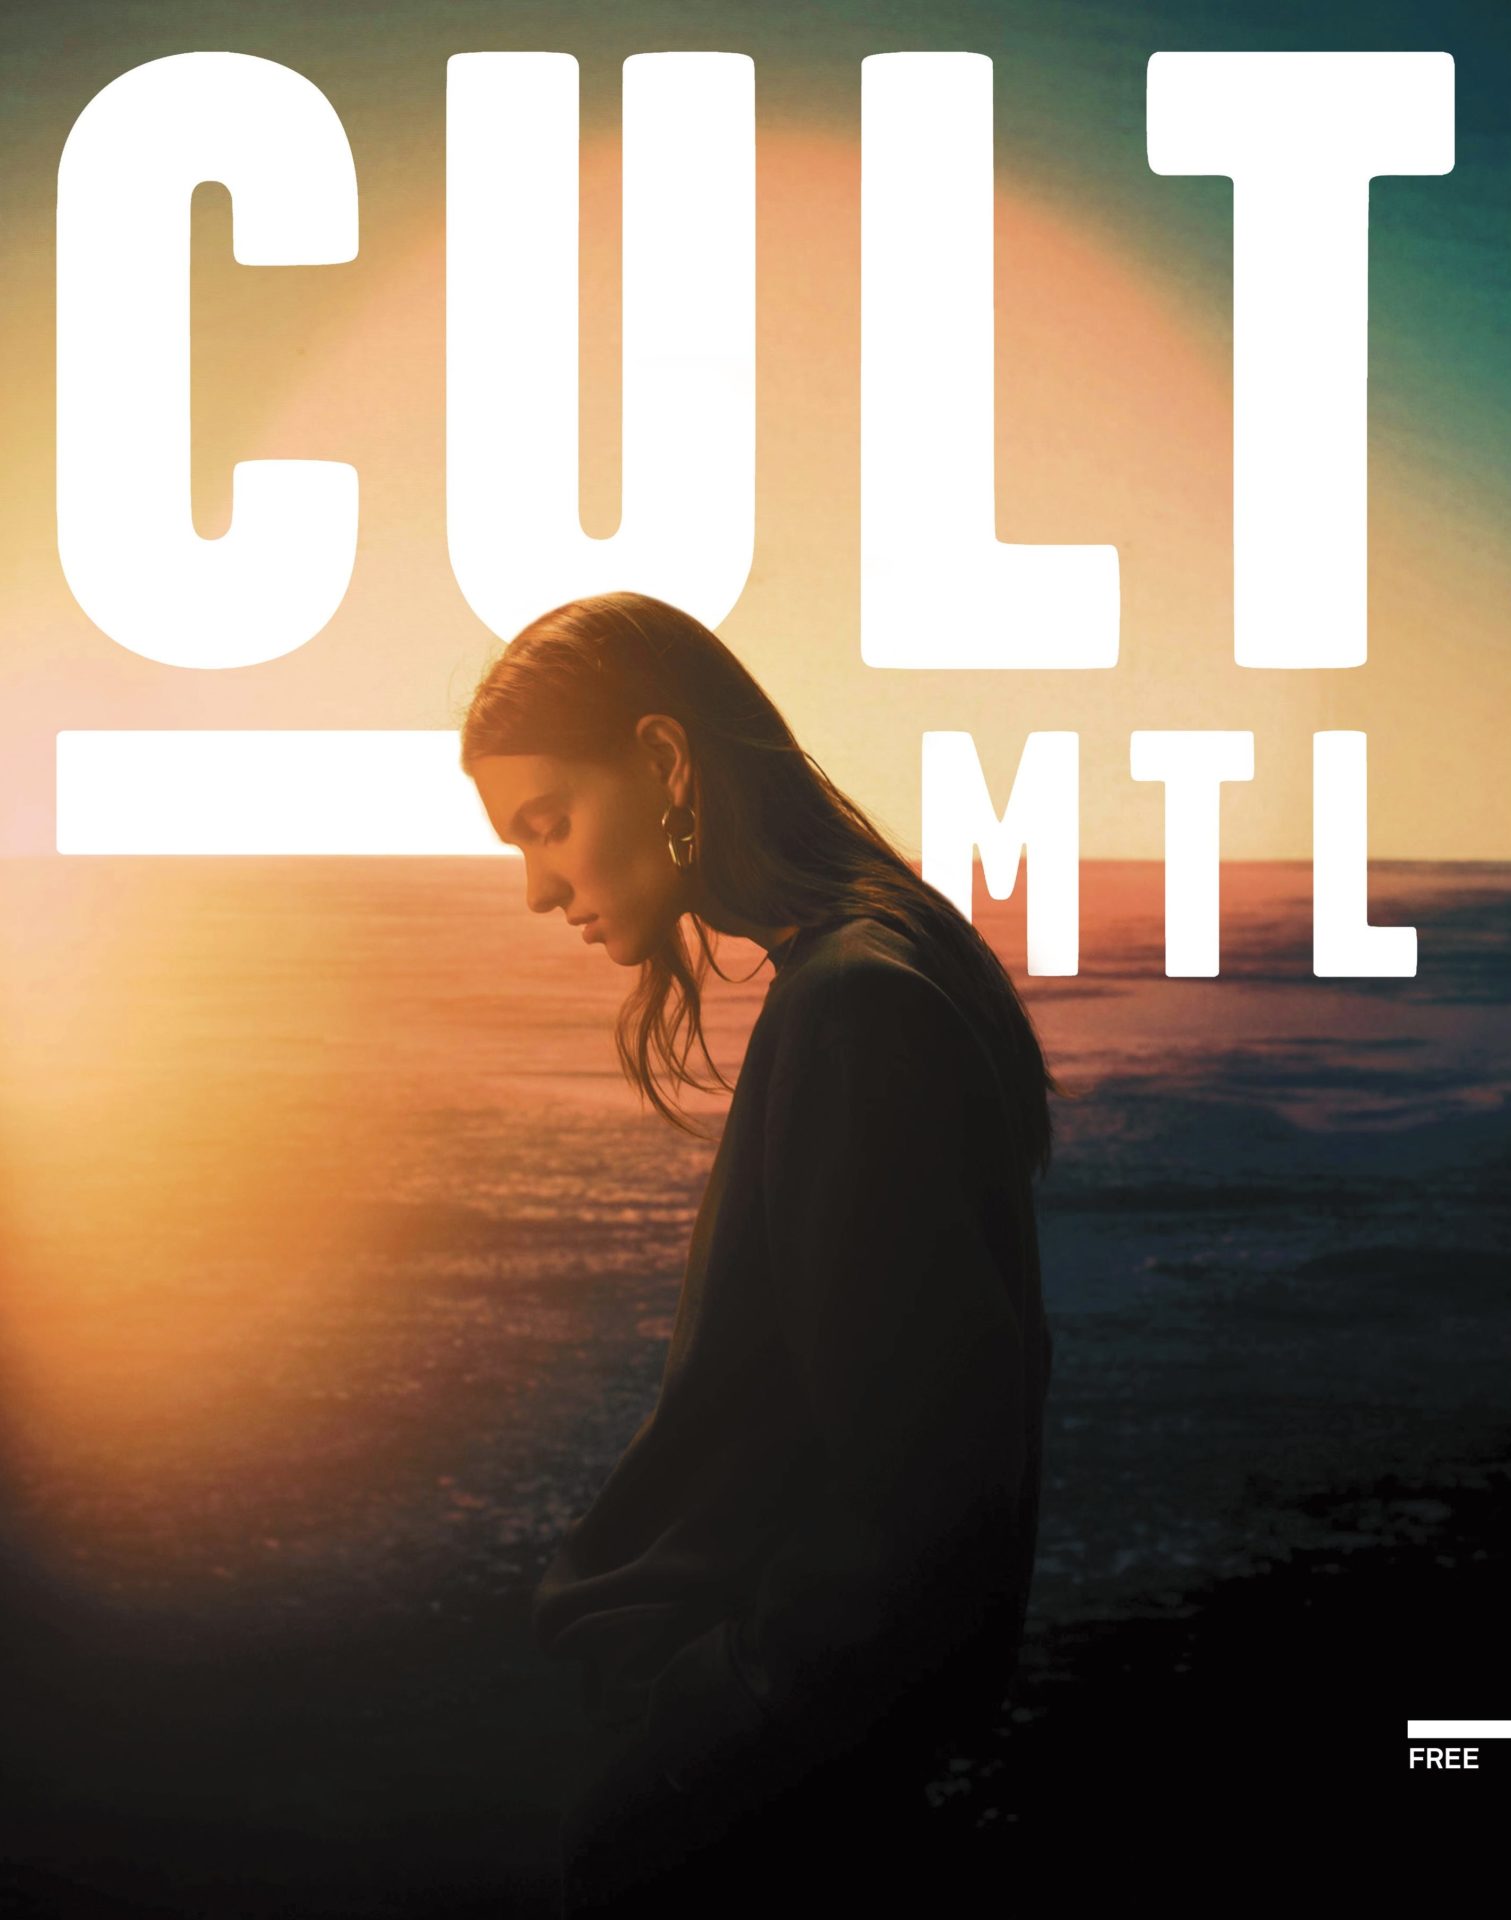 cult mtl april 2021 issue magazine cover charlotte cardin montreal